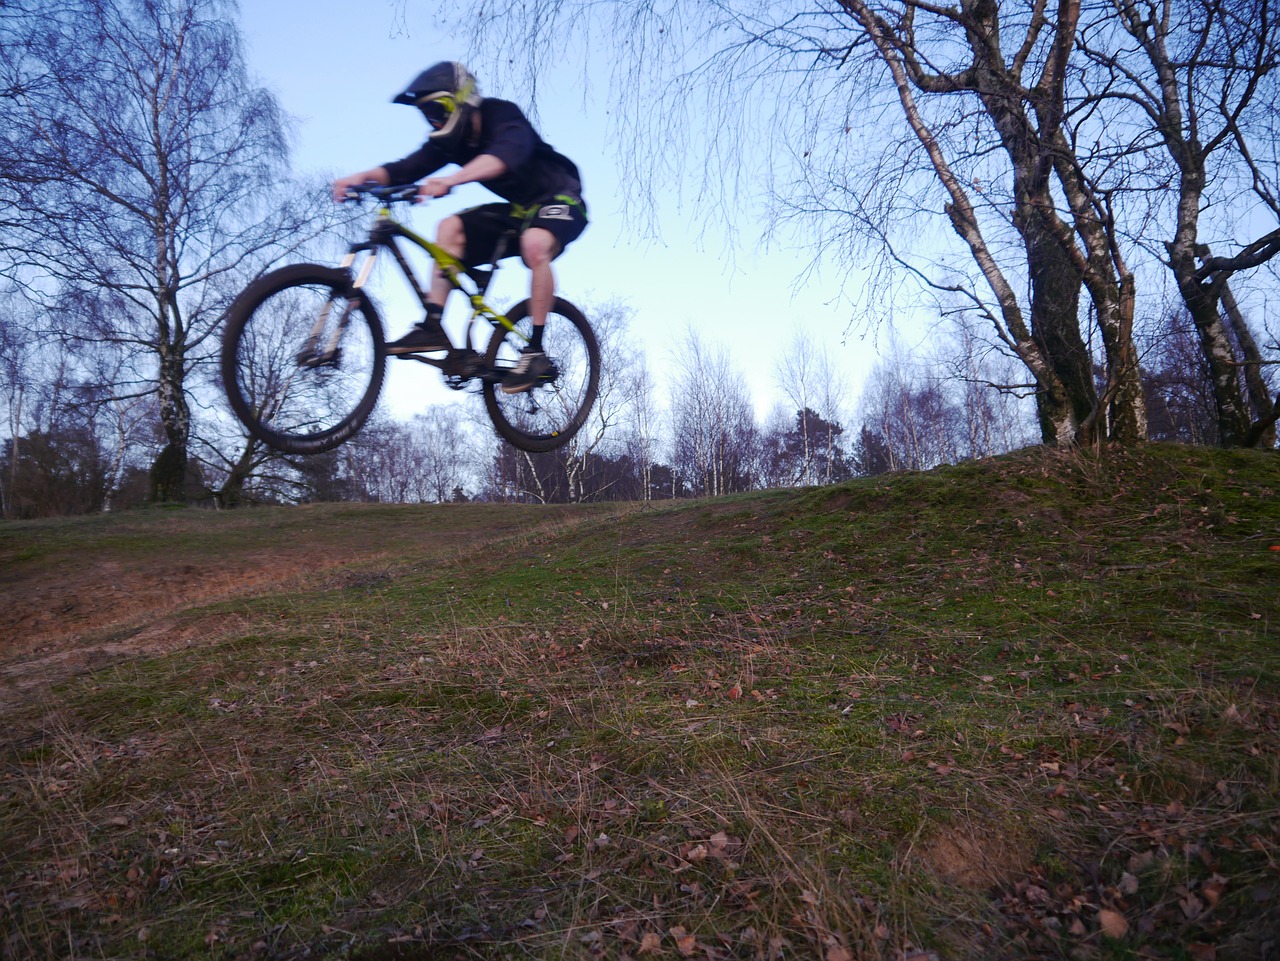 srpung dig trenches mountain bike free photo